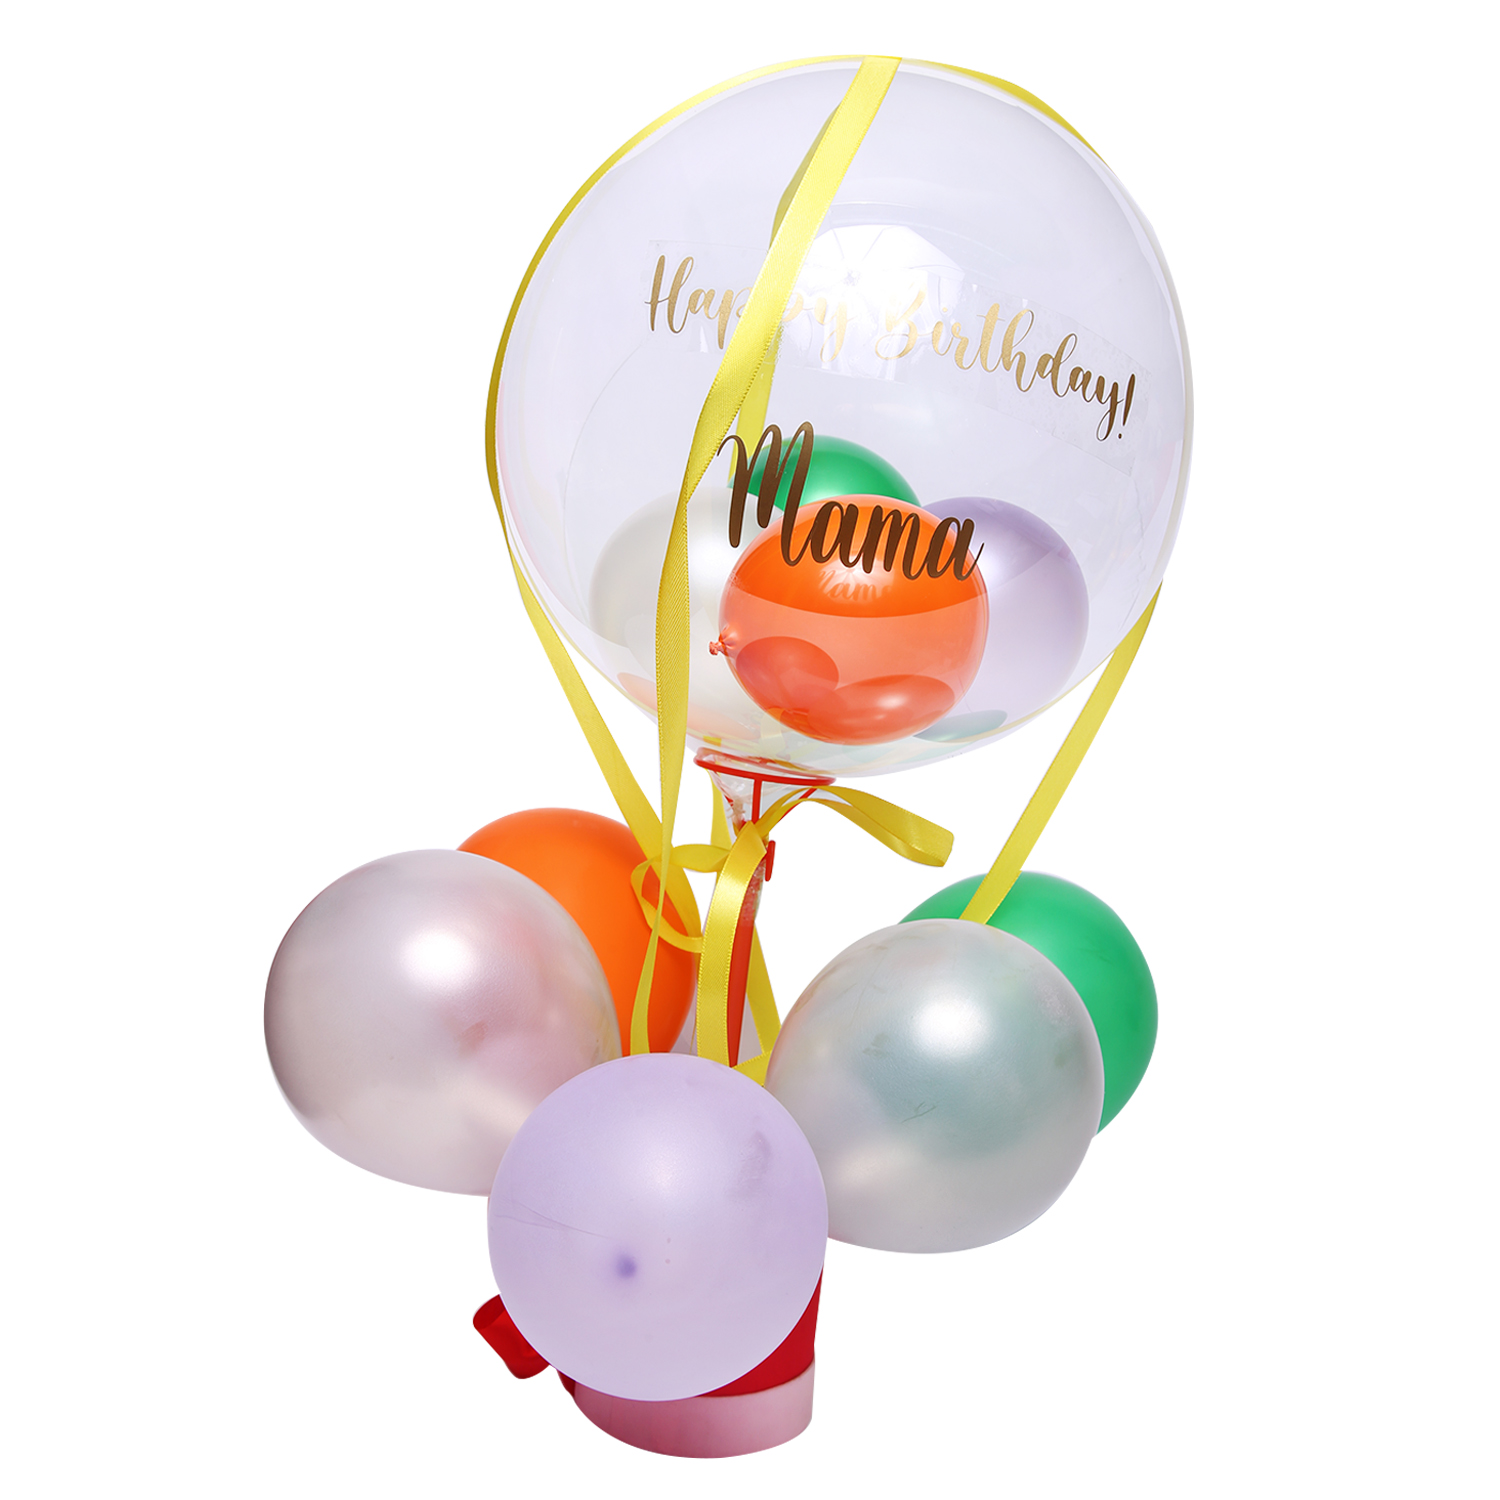 Personalized Hot Air Balloon with Small Balloons